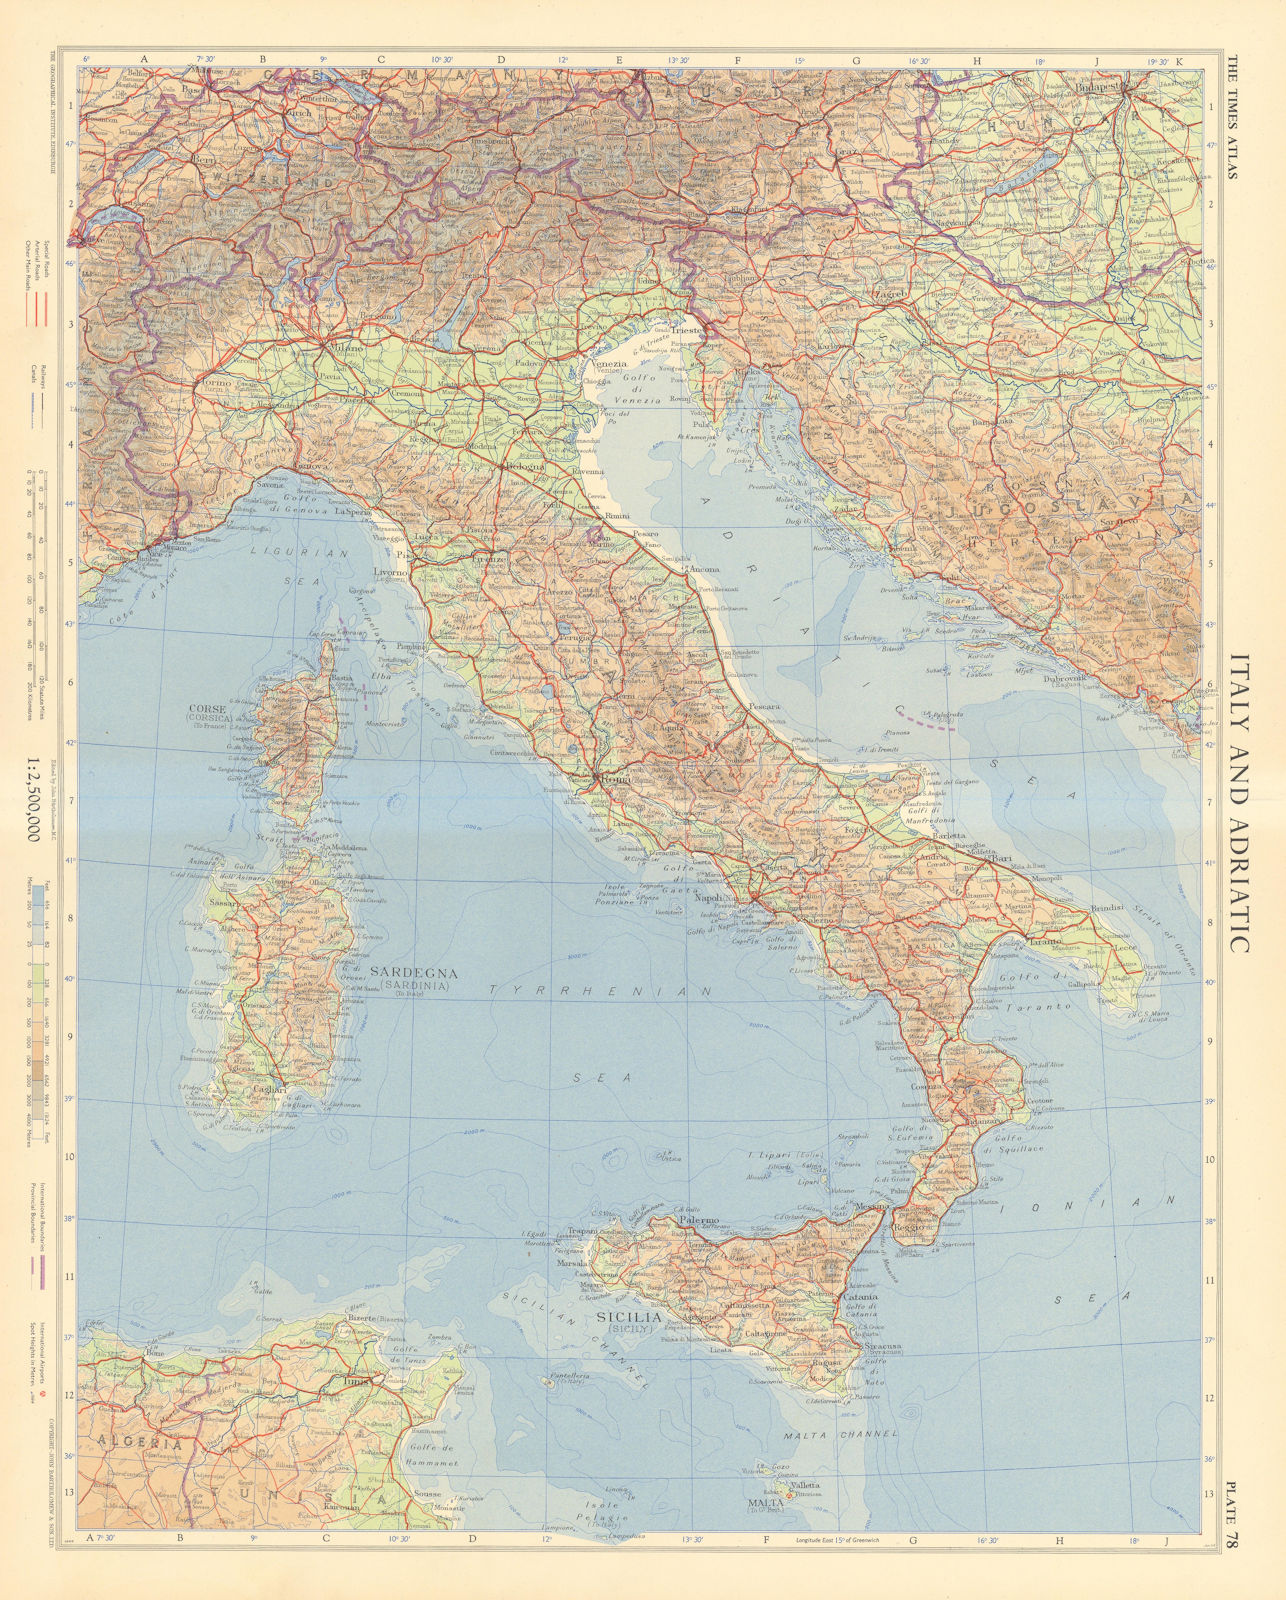 Italy and the Adriatic. Road network. Autostrade. TIMES 1956 old vintage map